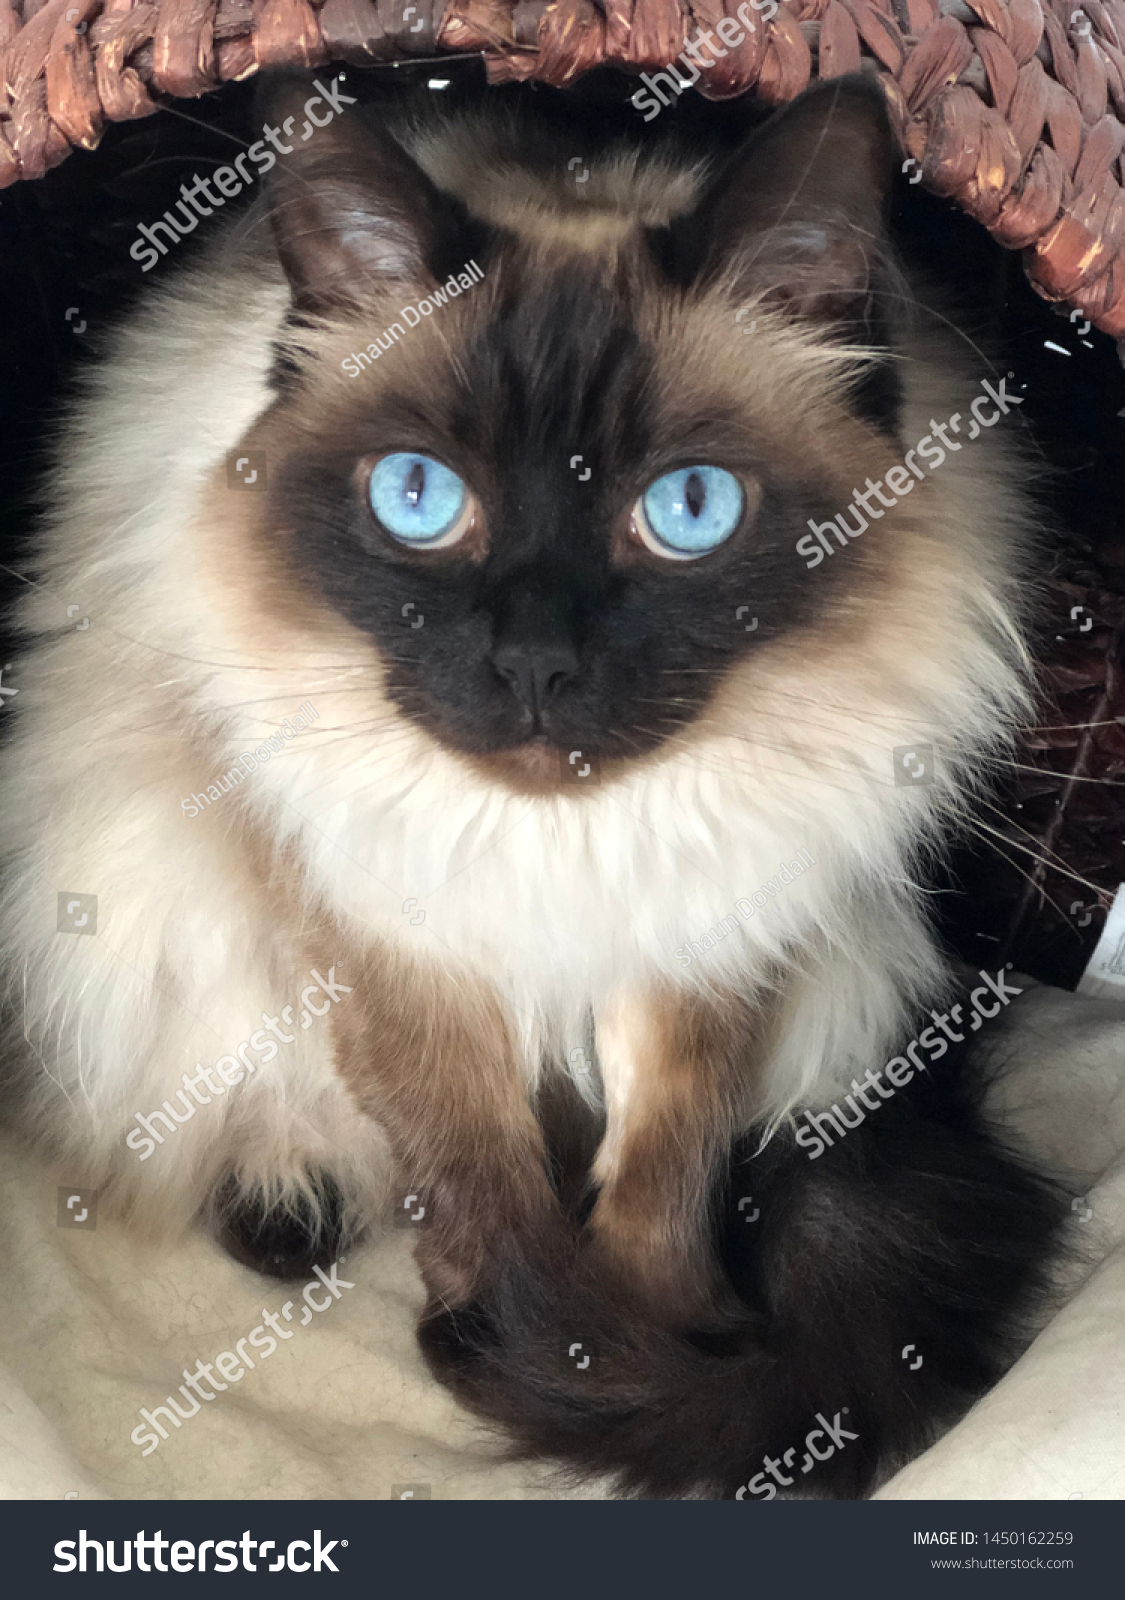 cats with blue eyes and grey fur